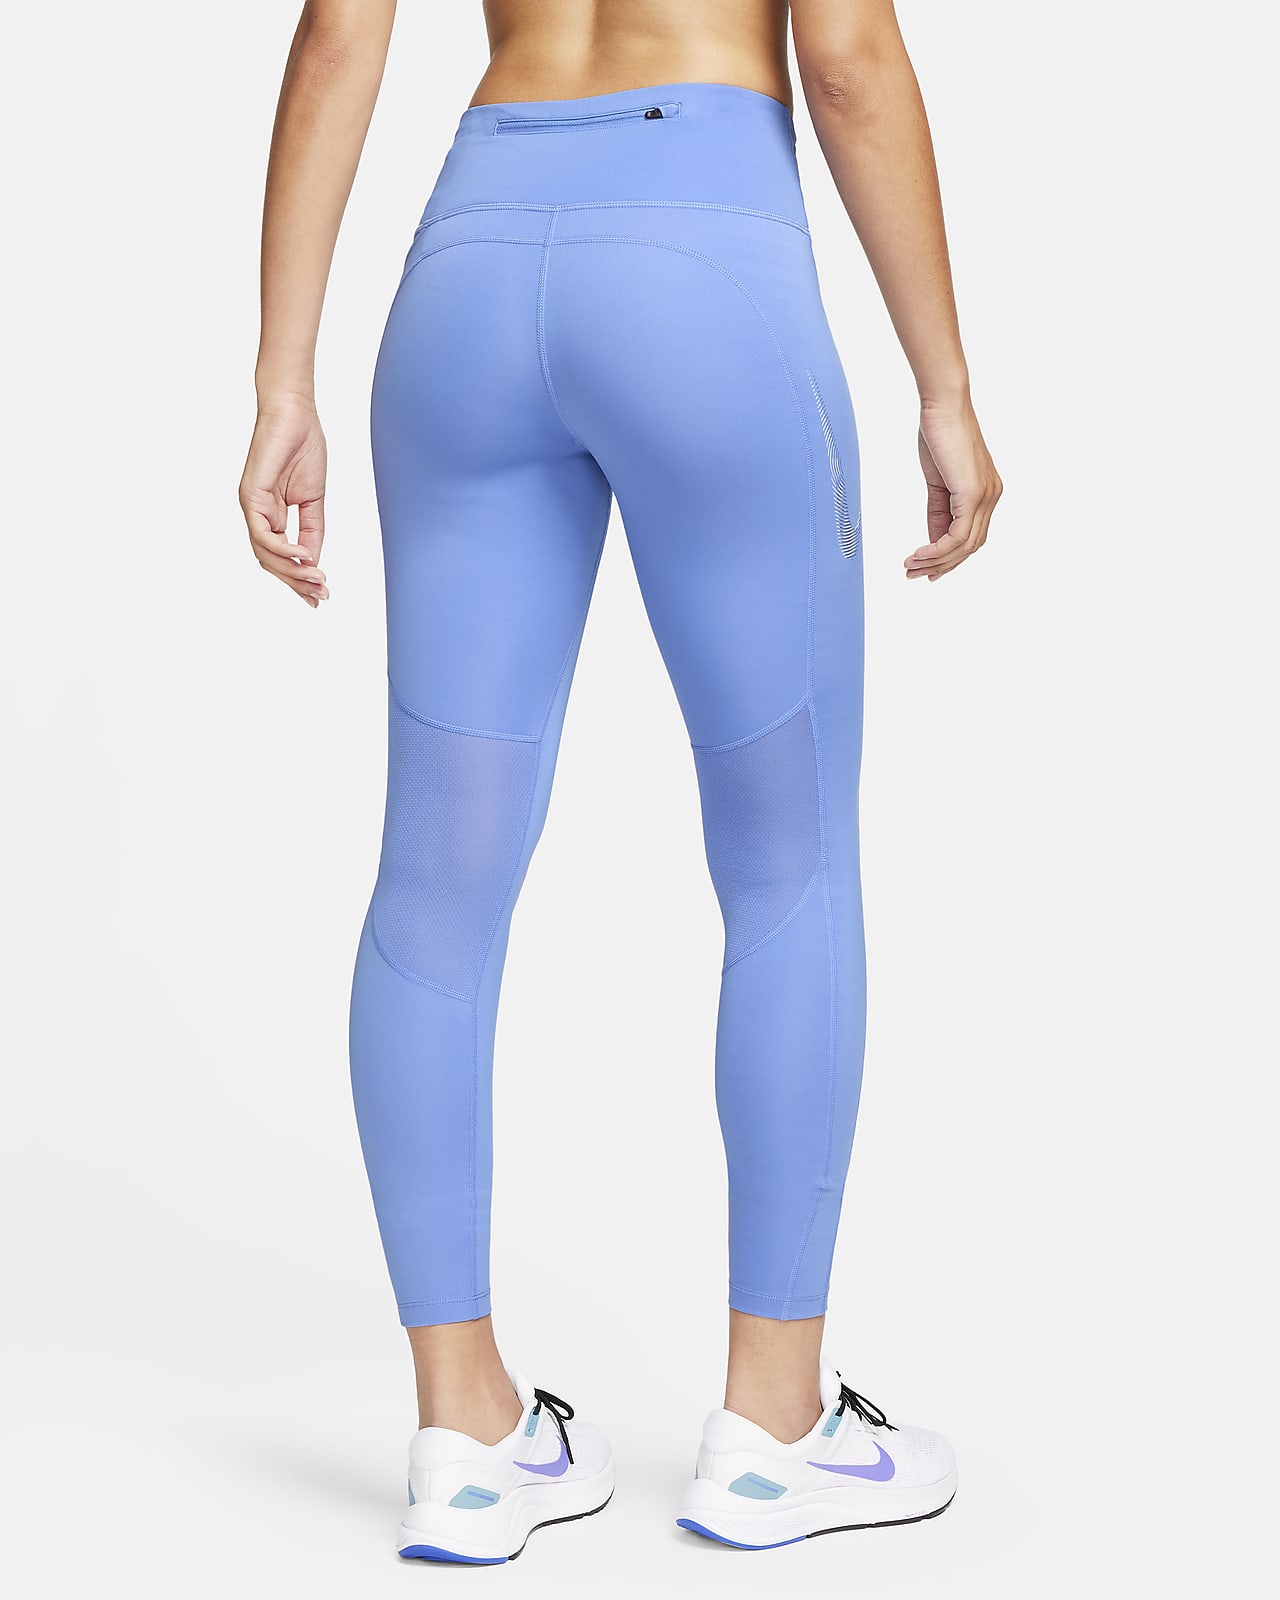 Nike Fast Women's Mid-Rise 7/8 Graphic Leggings with Pockets. Nike SK